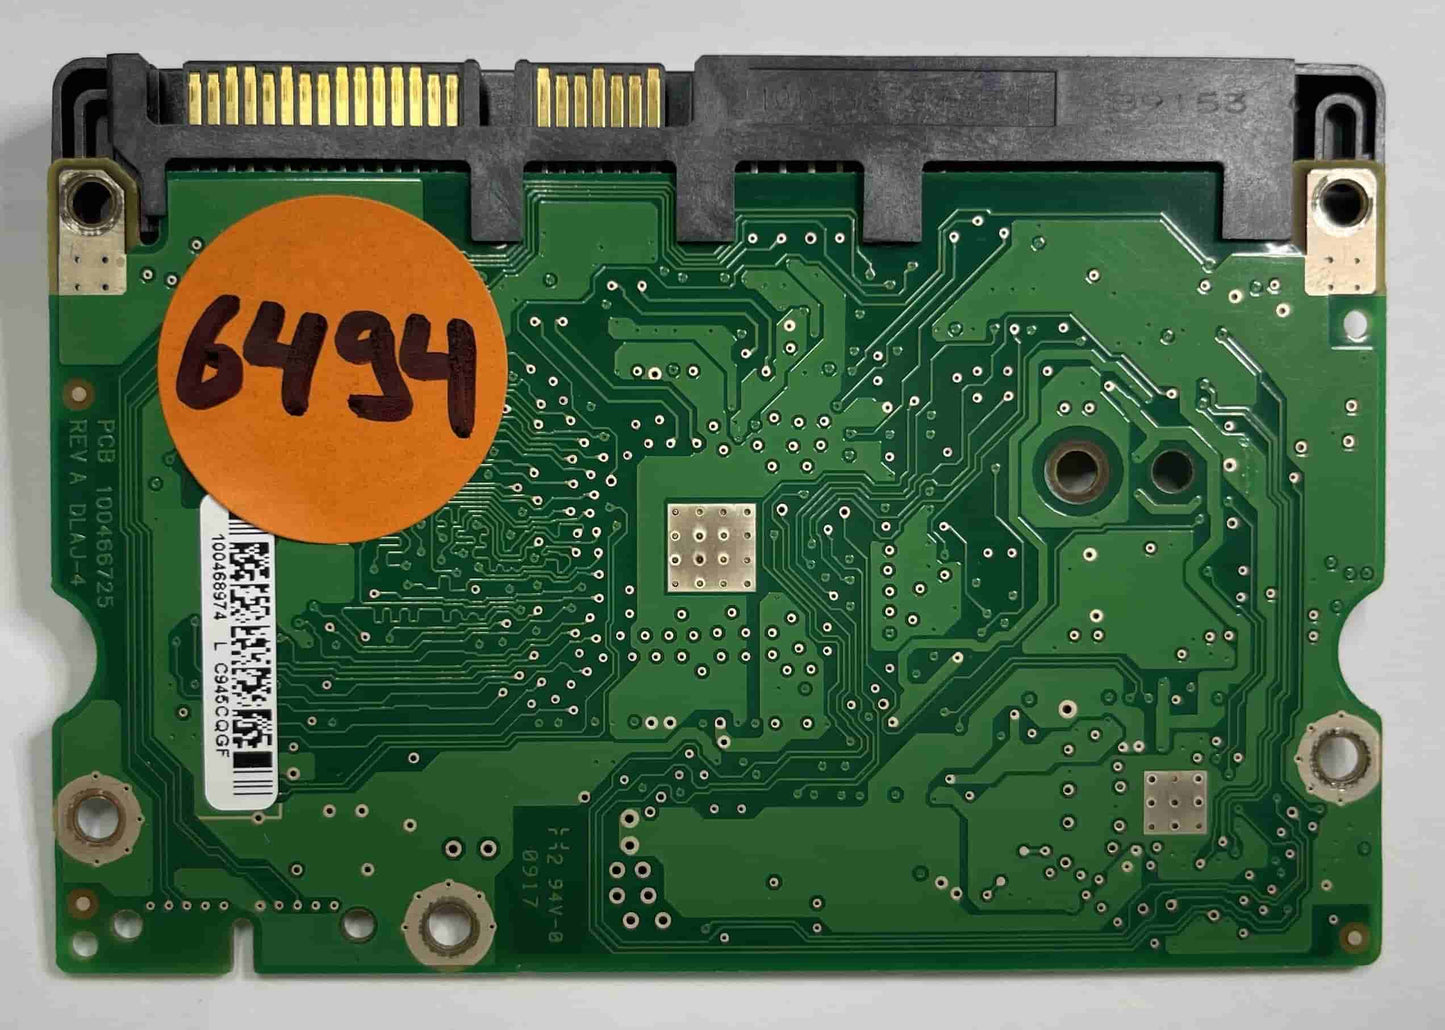 Seagate ST3500820AS  100466725 REV A 9BX134-505 PCB for Sale